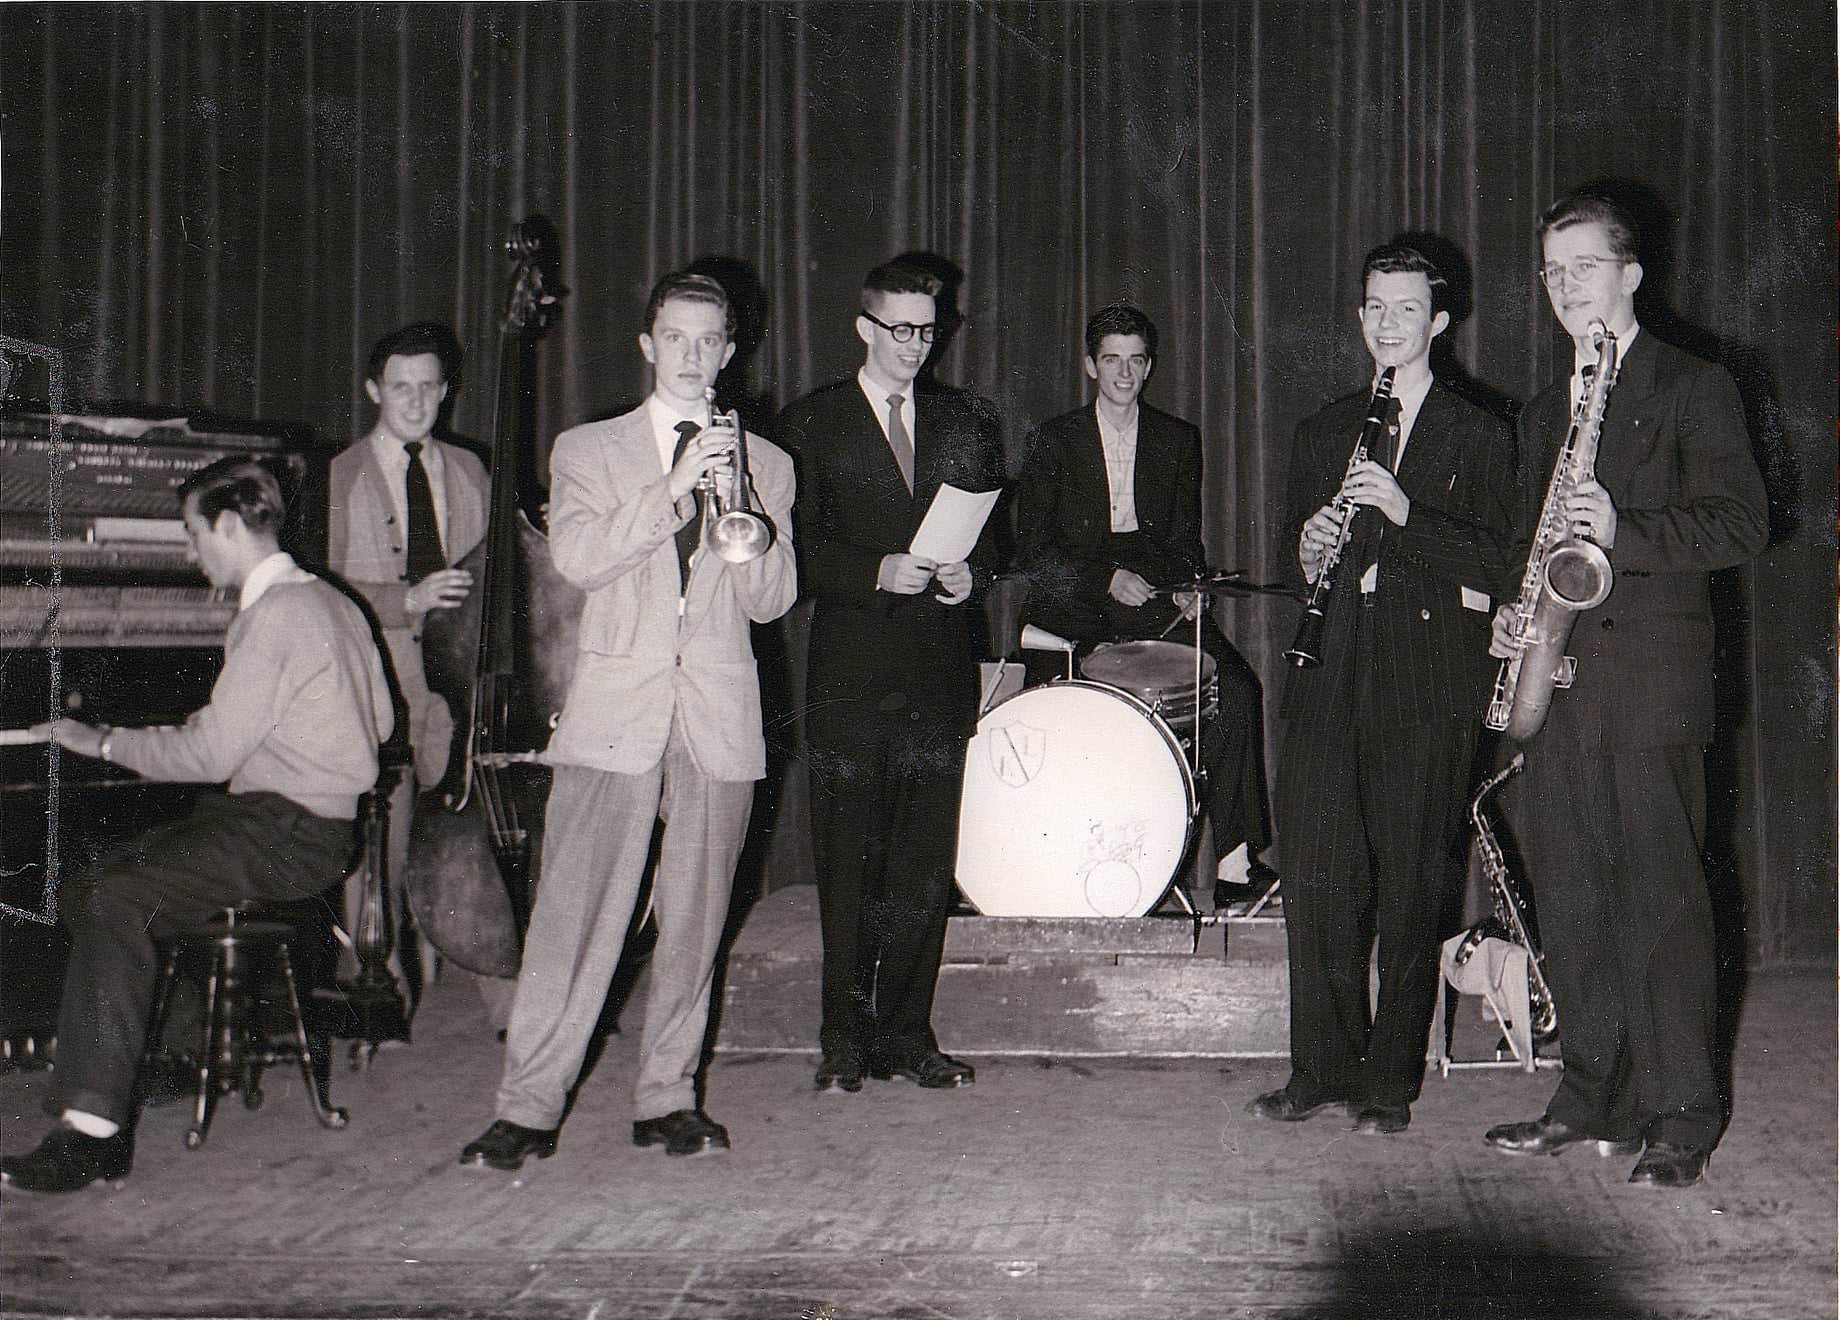 The Northern Secondary school jazz band, 1946